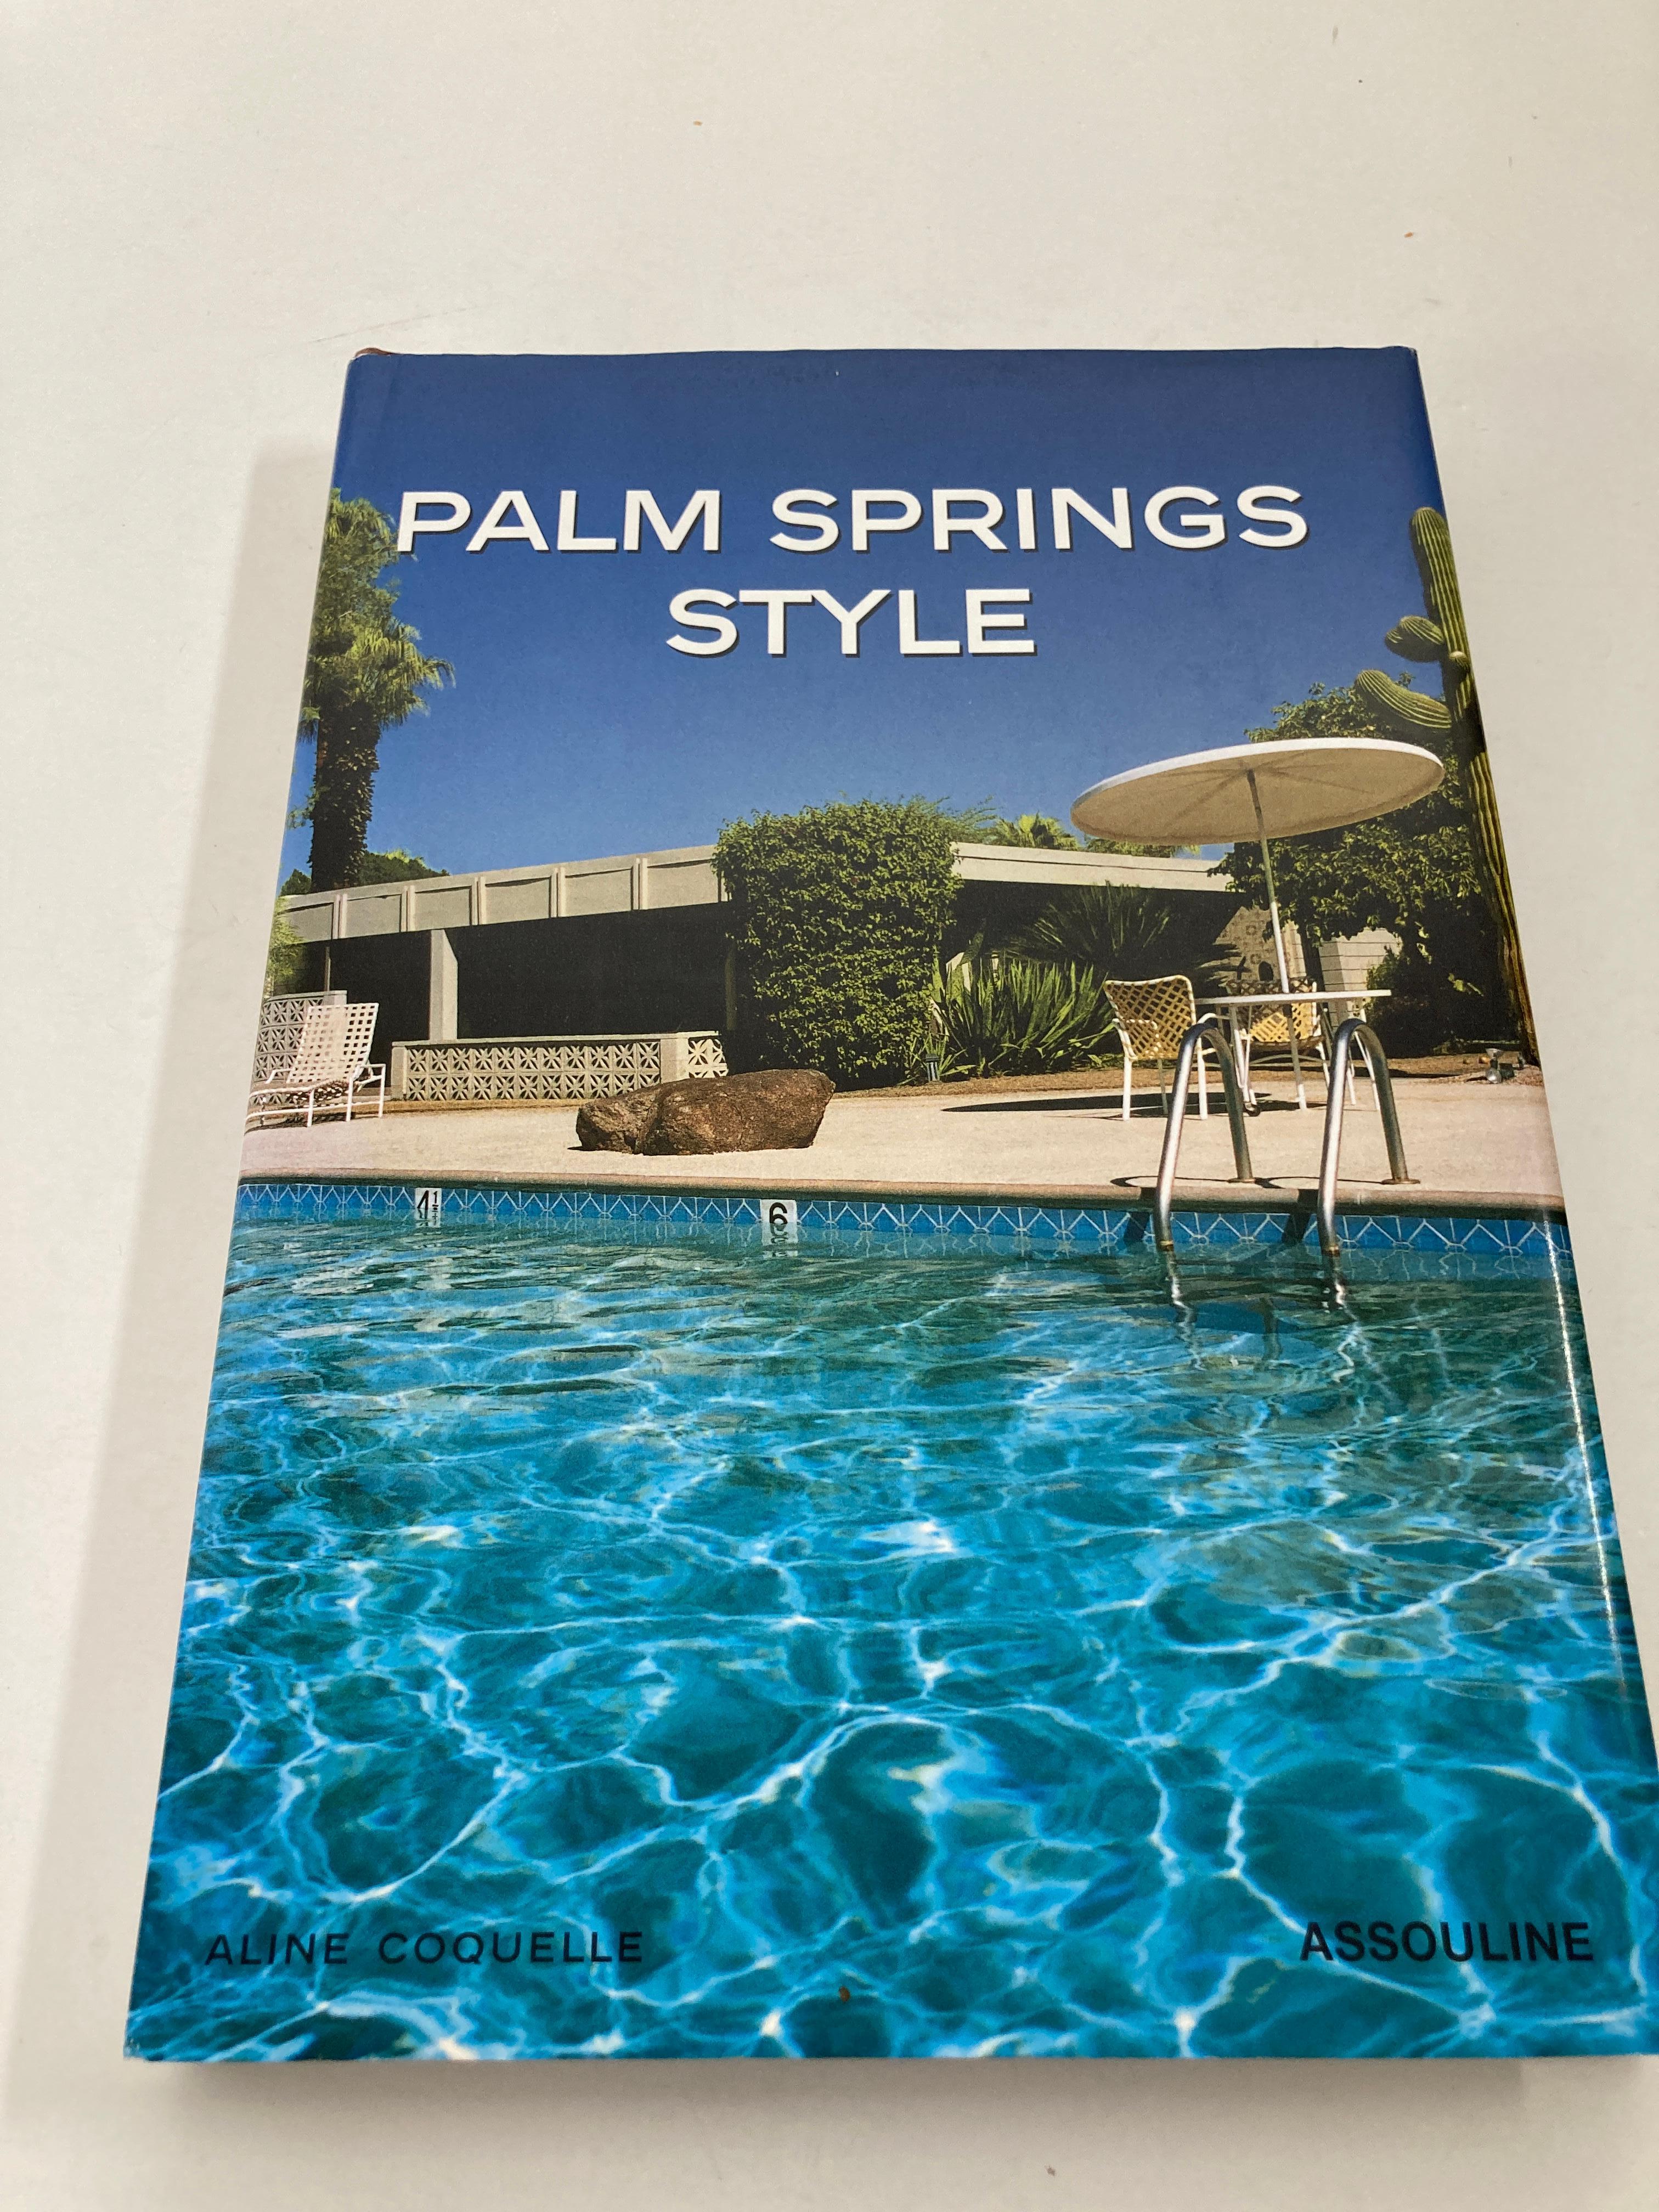 Dean Martin, Marilyn Monroe, Frank Sinatra, Kirk Douglas and Elvis Presley made it their stomping grounds. Wildly free in the post-war years, Palm Springs was all about luxury, parties, sex, and sun. It was inspired by the designs of European